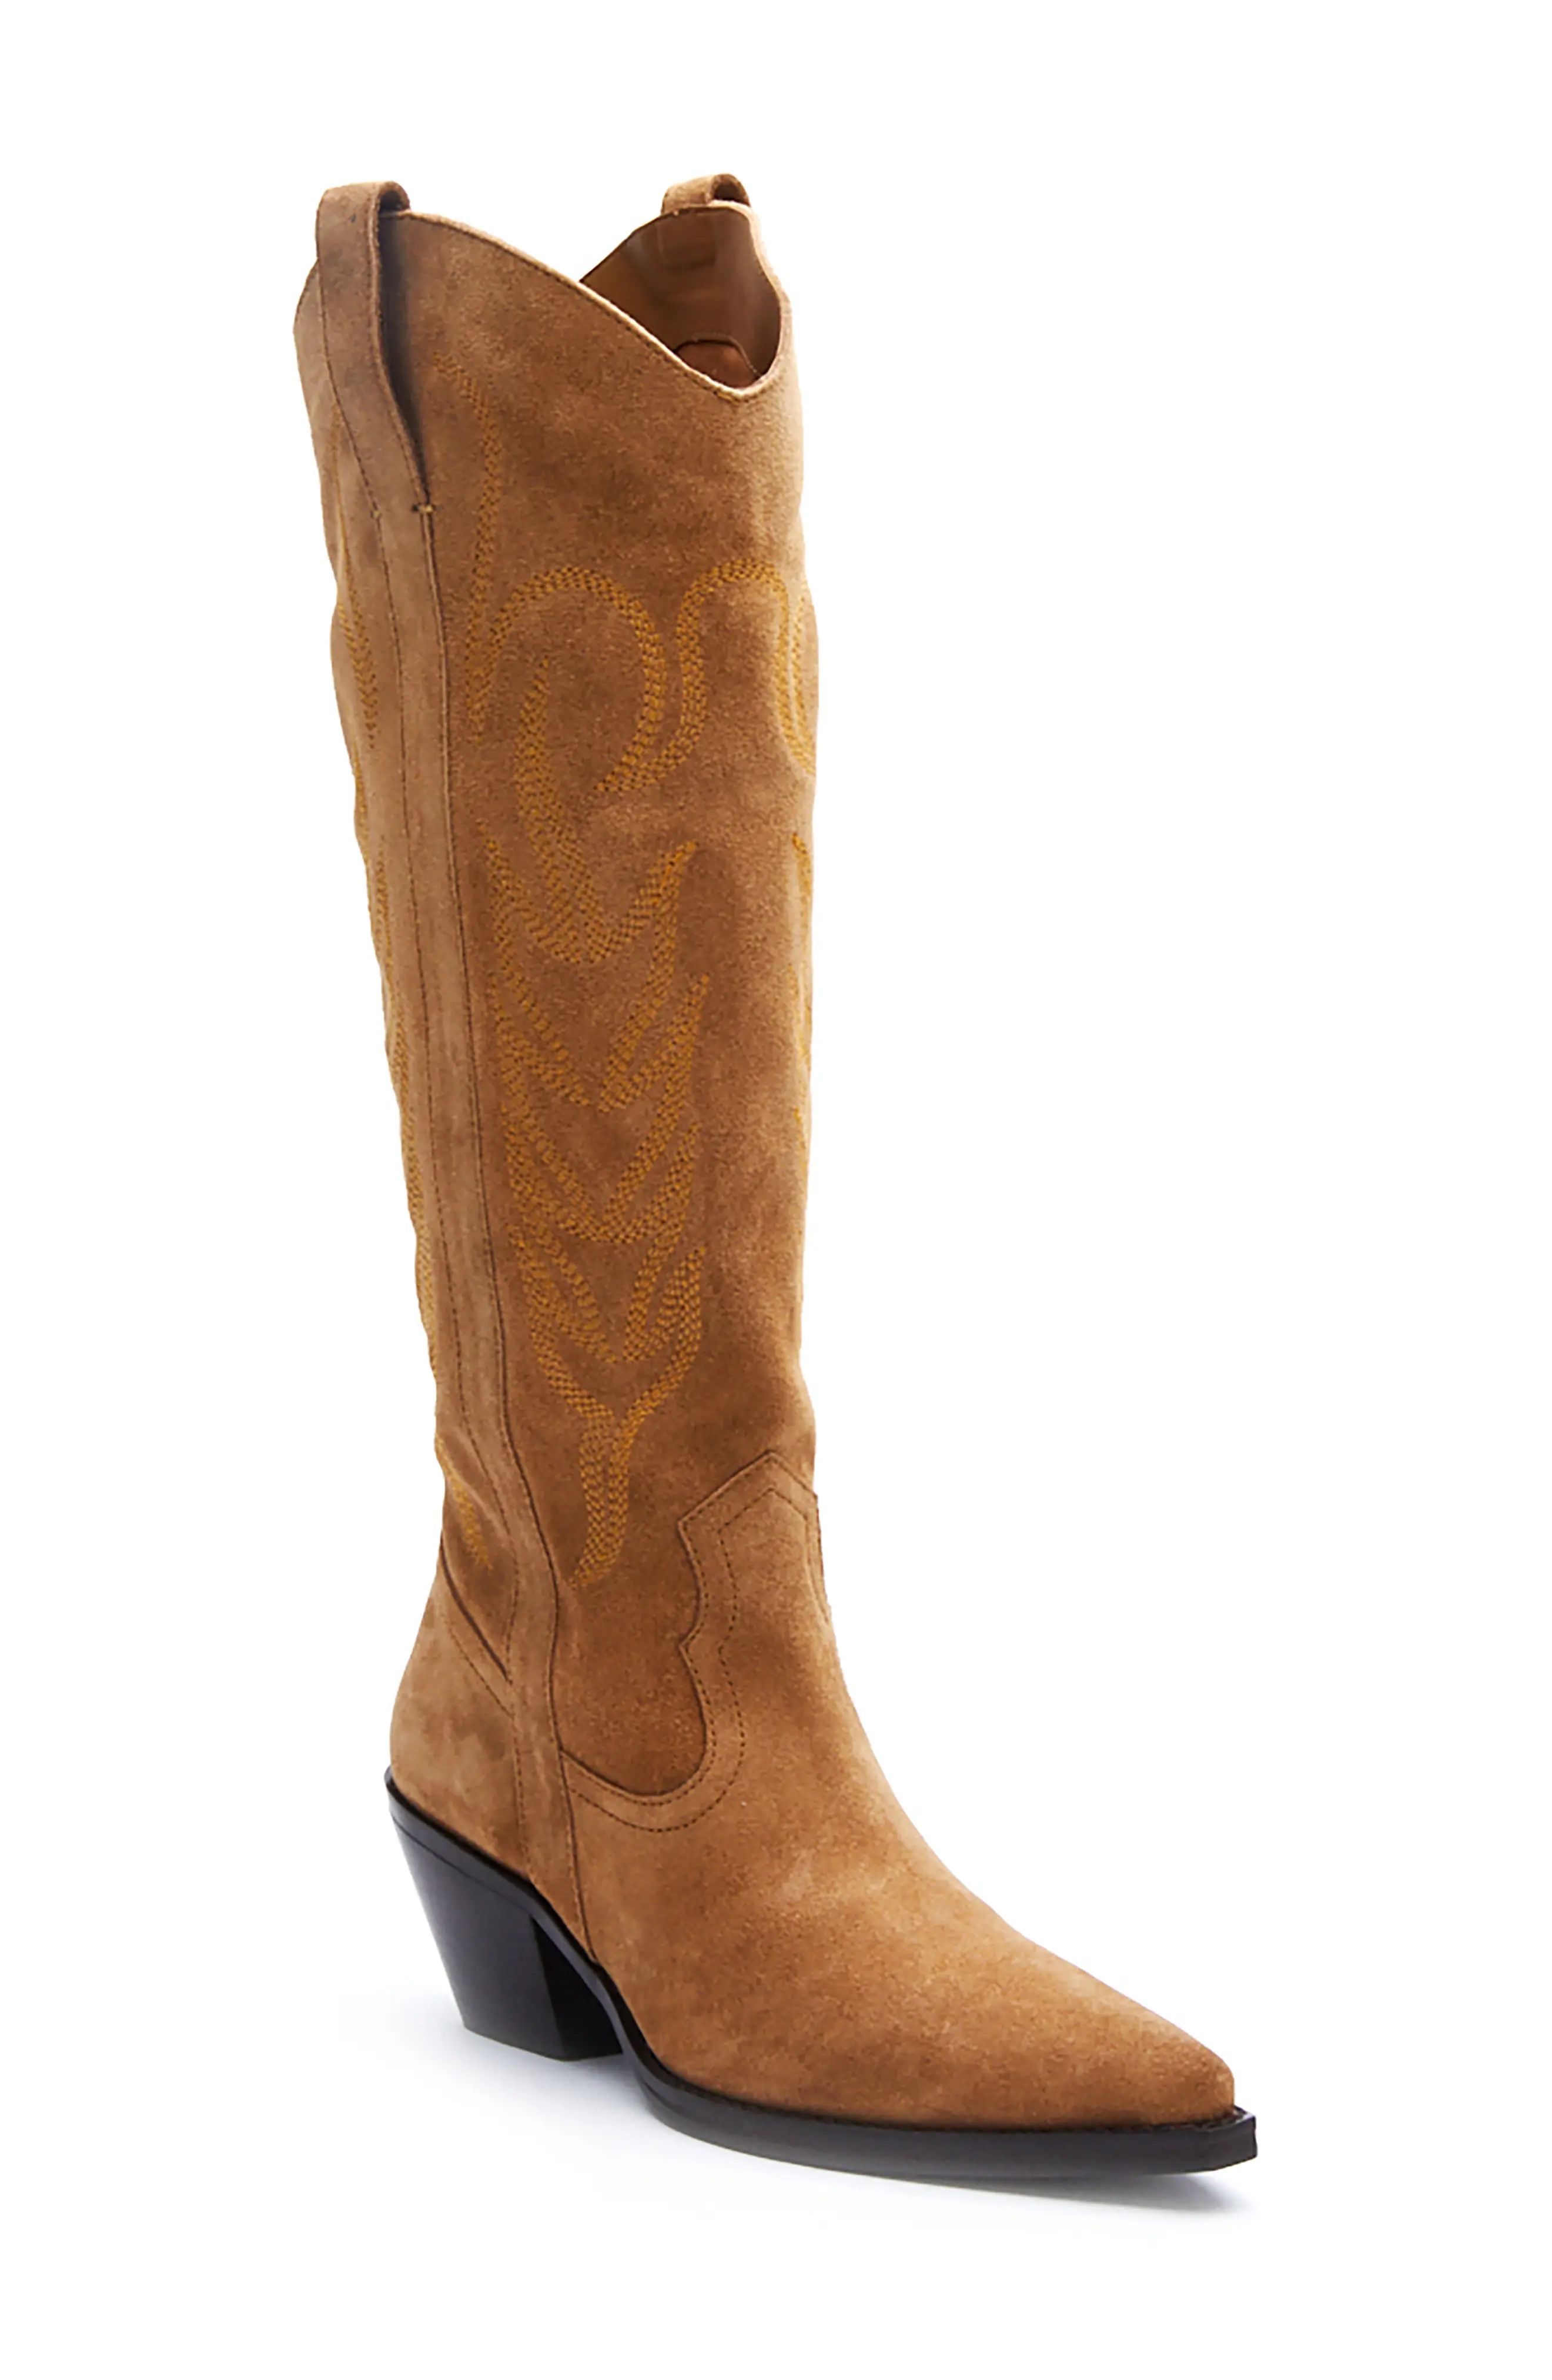 Coconuts by Matisse Agency Western Pointed Toe Boot in Tan at Nordstrom, Size 10 | Nordstrom